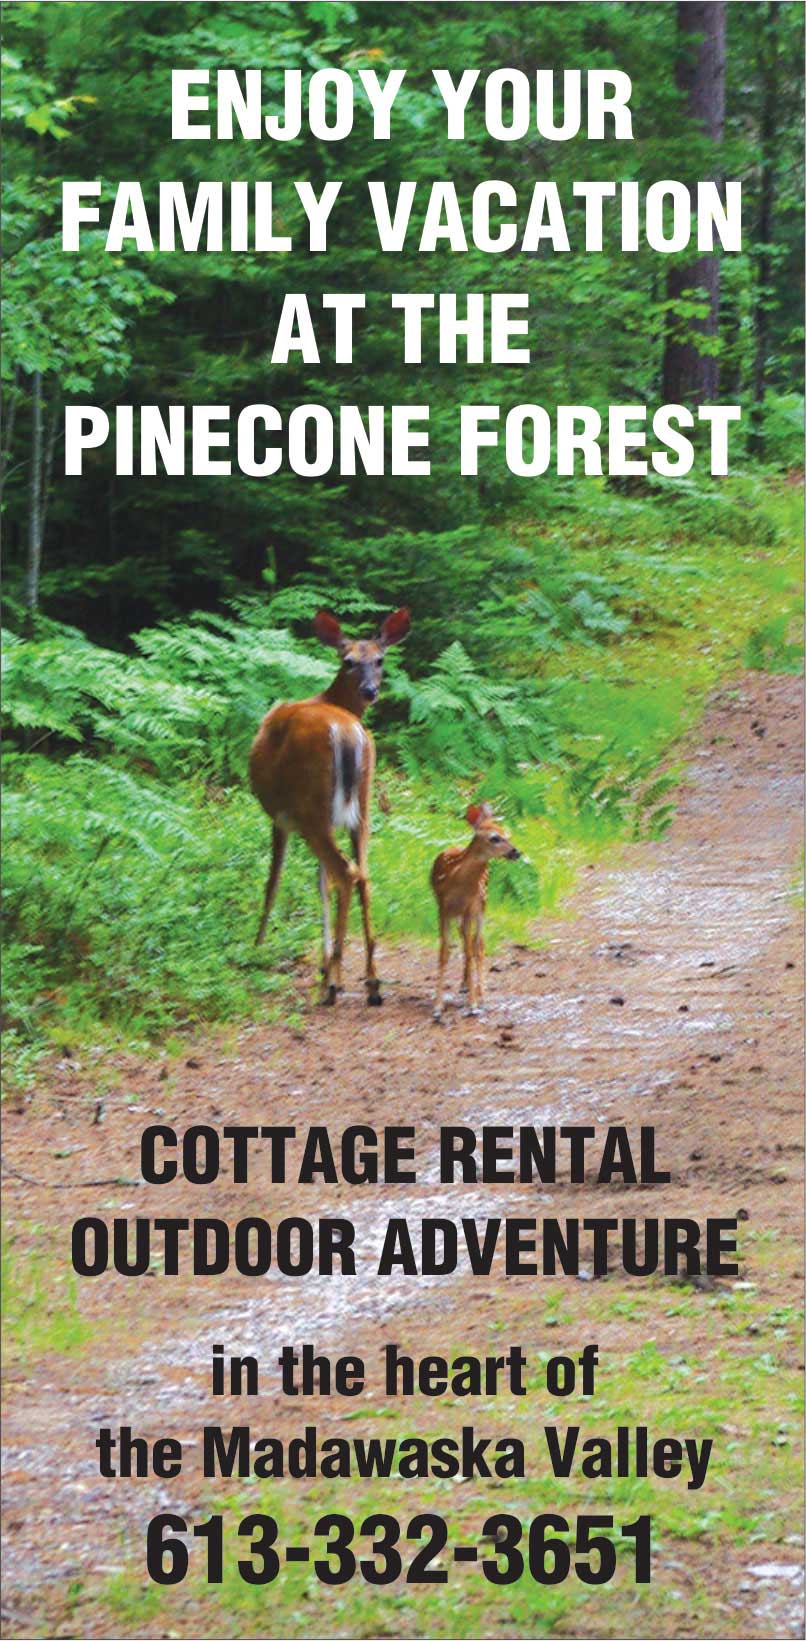 The Pinecone Forest Cottage Rental and Adventures